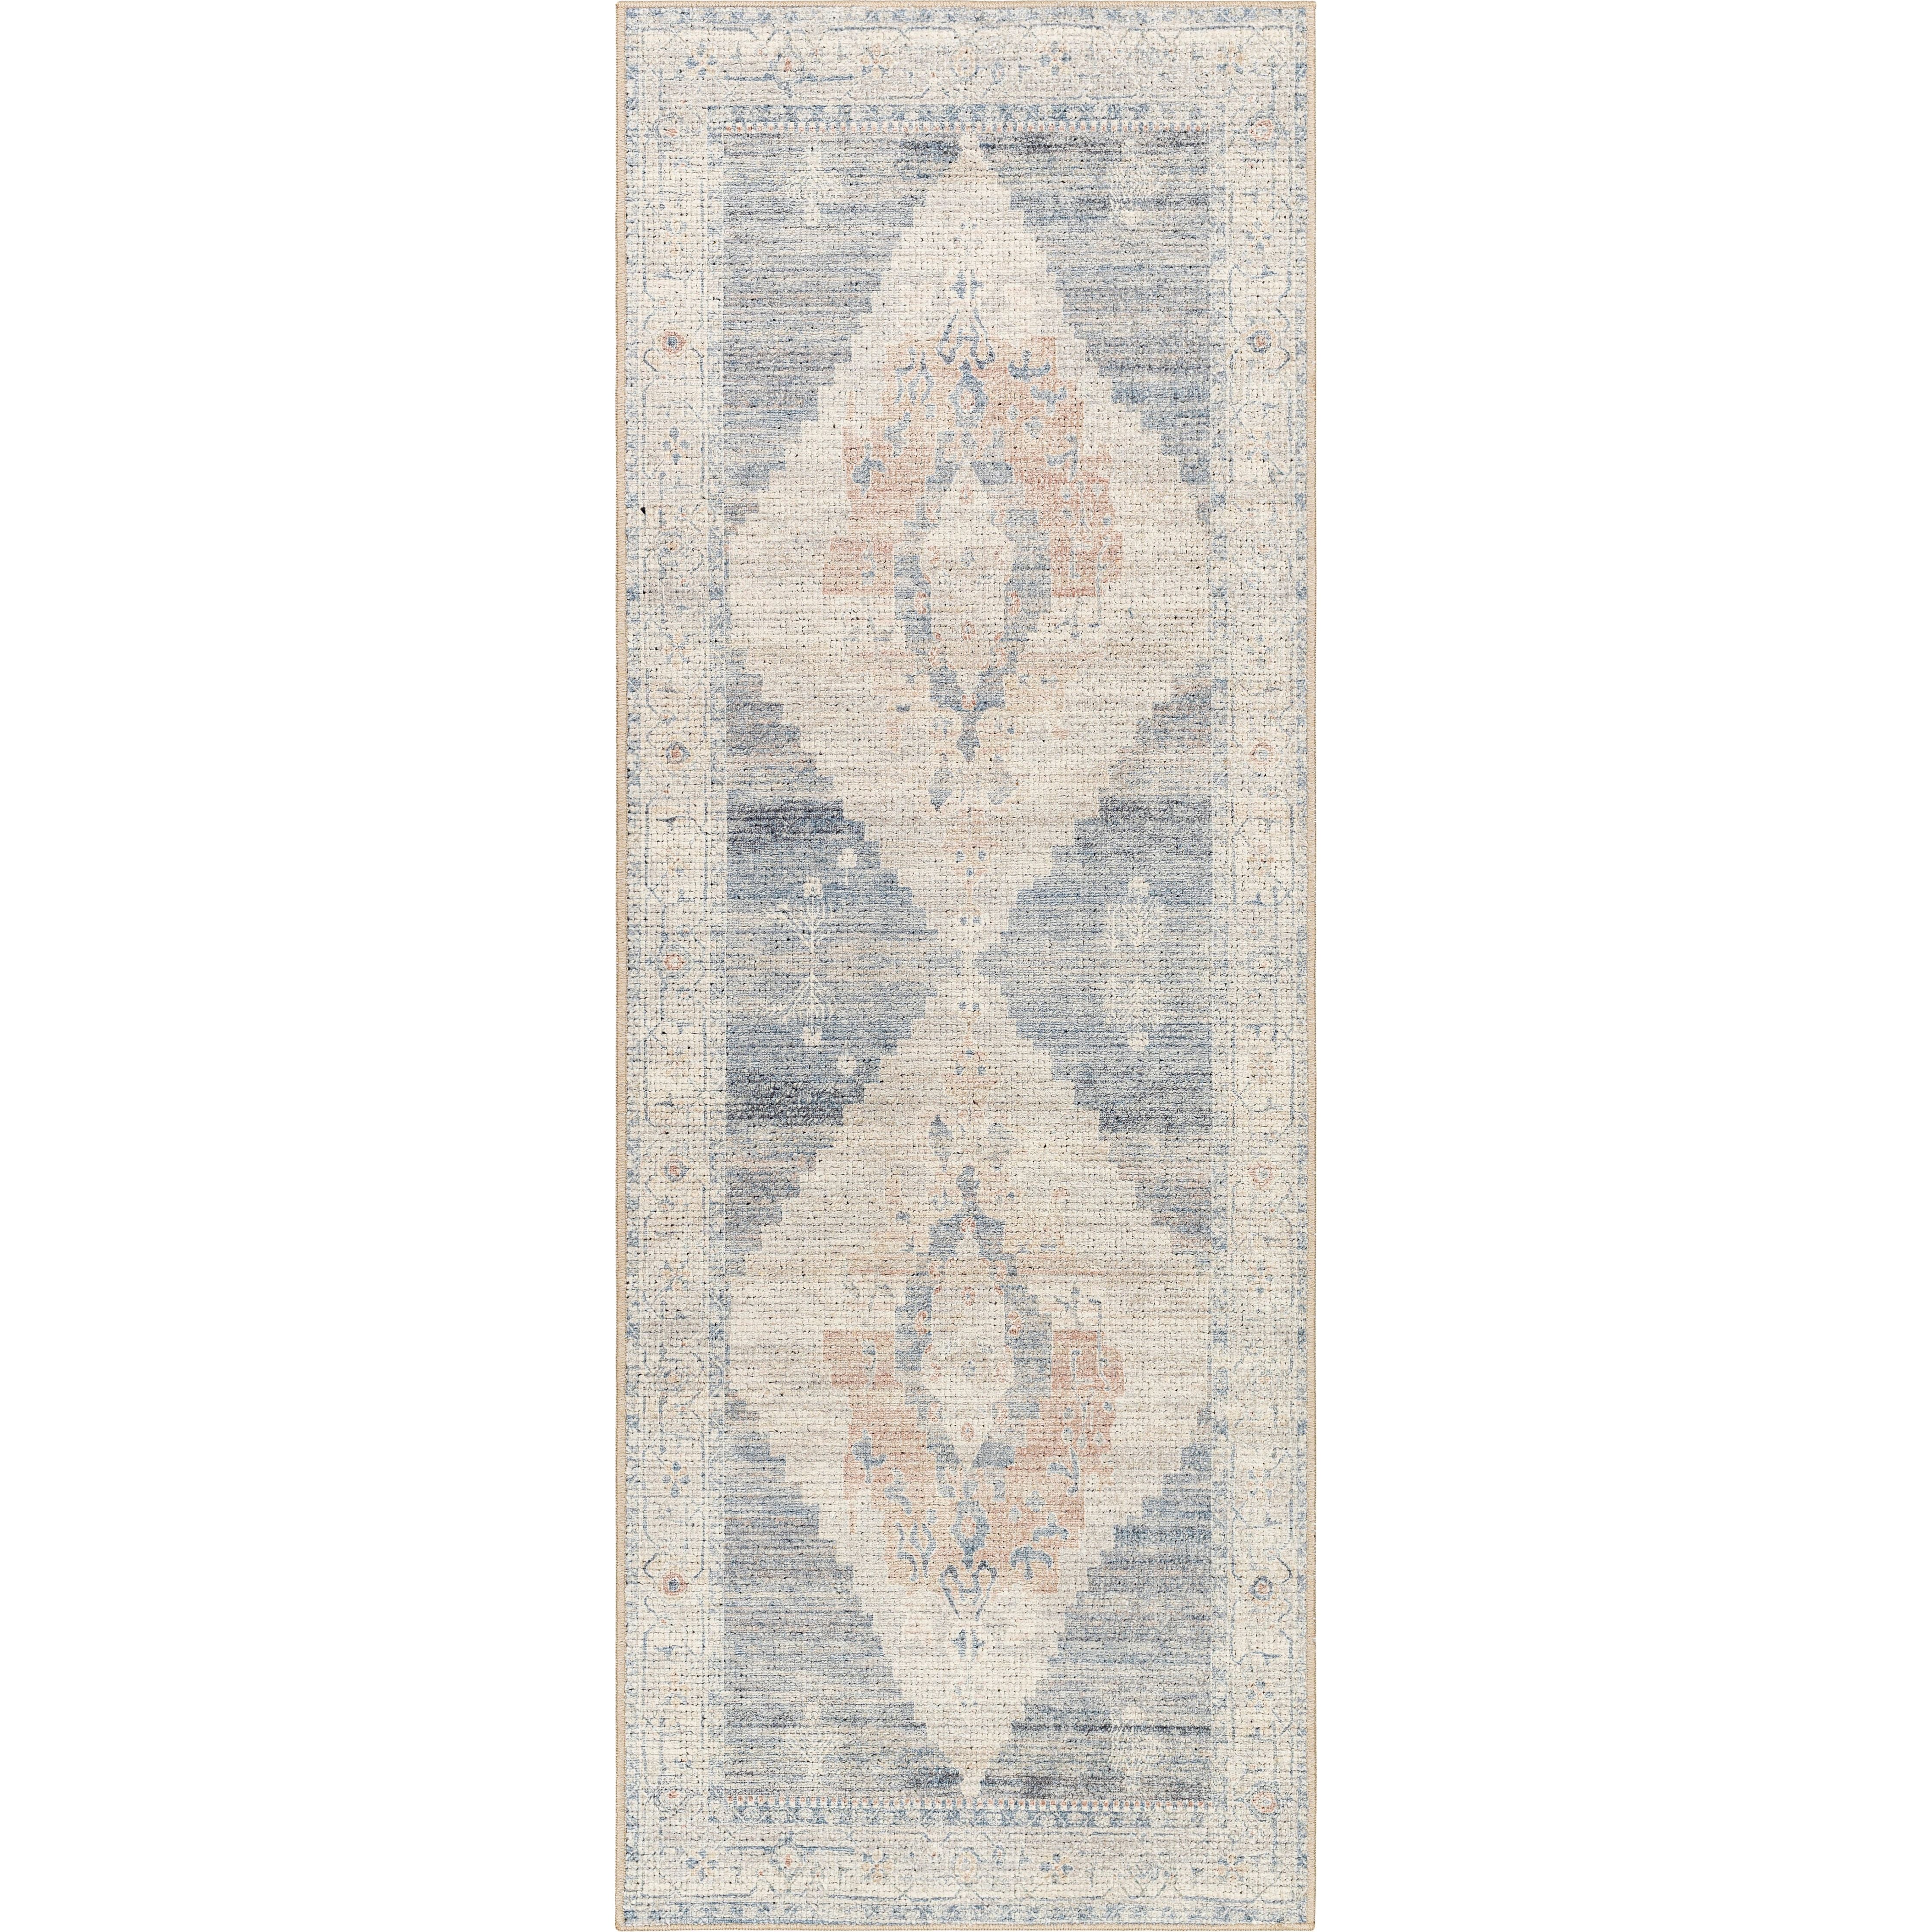 The Luca Pewter Medallion Rug from Becki Owens x Surya is a vintage inspired collection full of rich design and subtle versatile colors that will bring a curated and collected feel to any room. Amethyst Home provides interior design, new construction, custom furniture, and area rugs in the Las Vegas metro area.